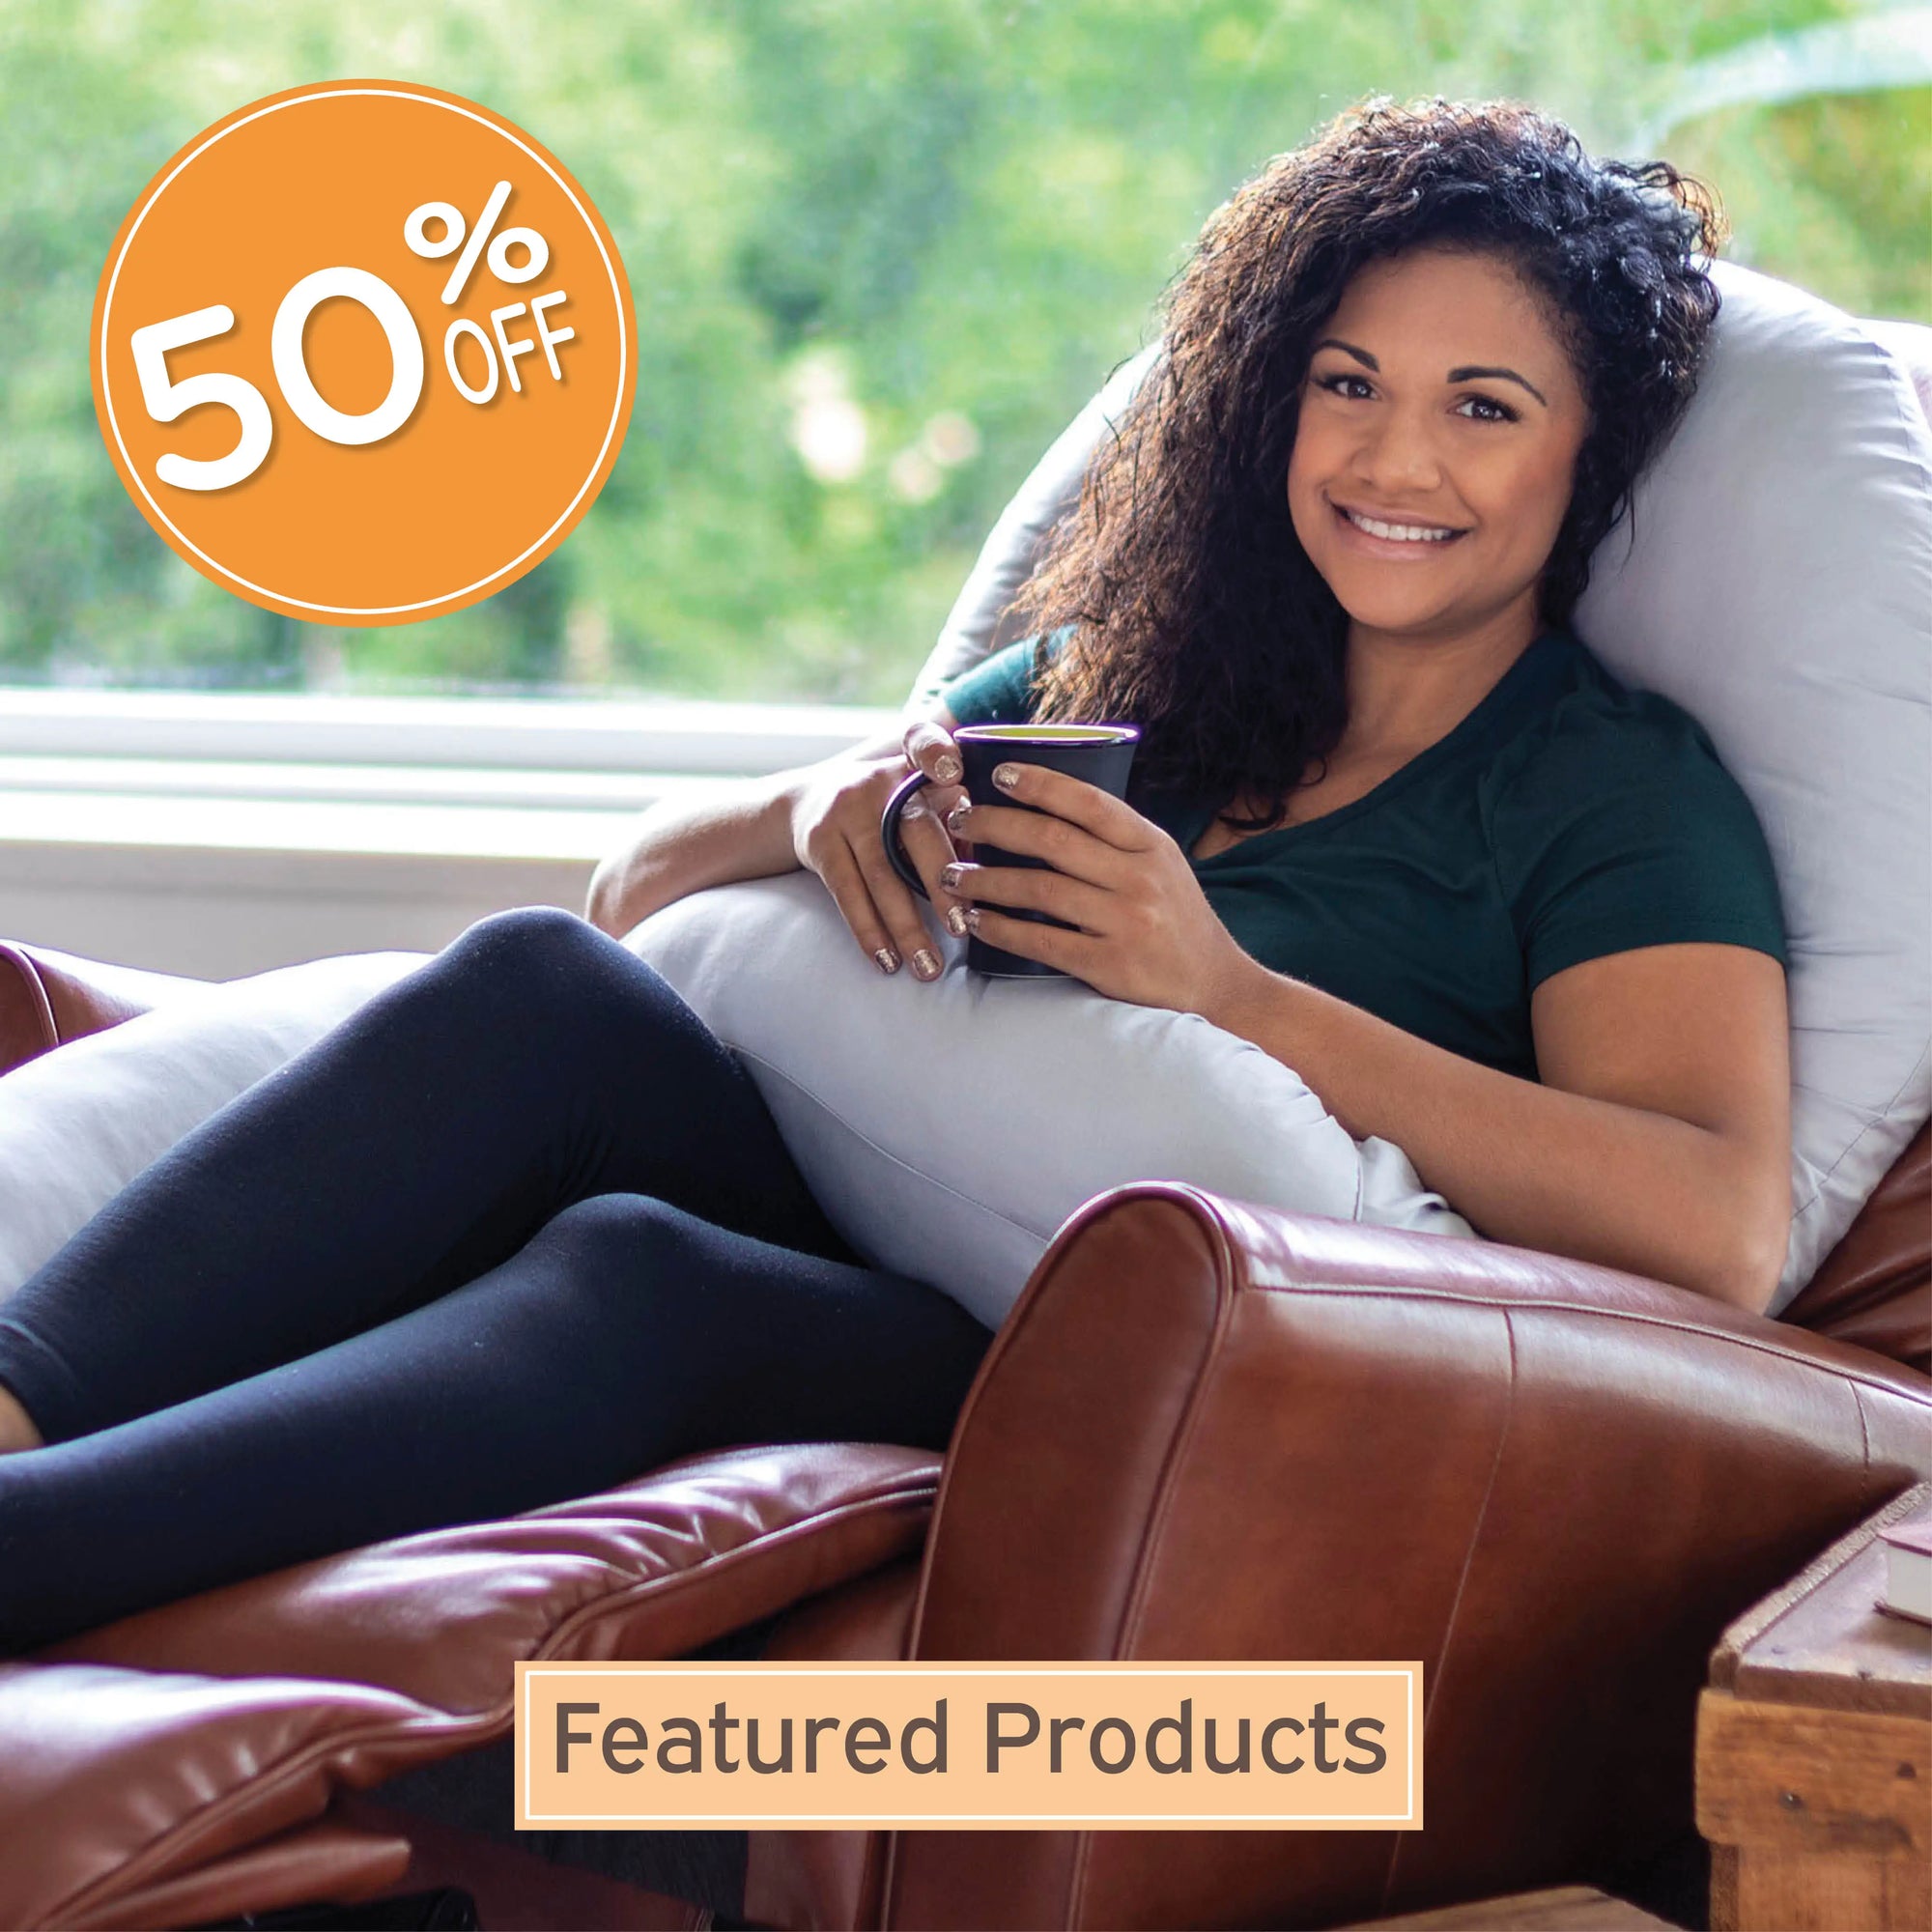 50% Off Featured Products with Canoodle in Peaceful Gray